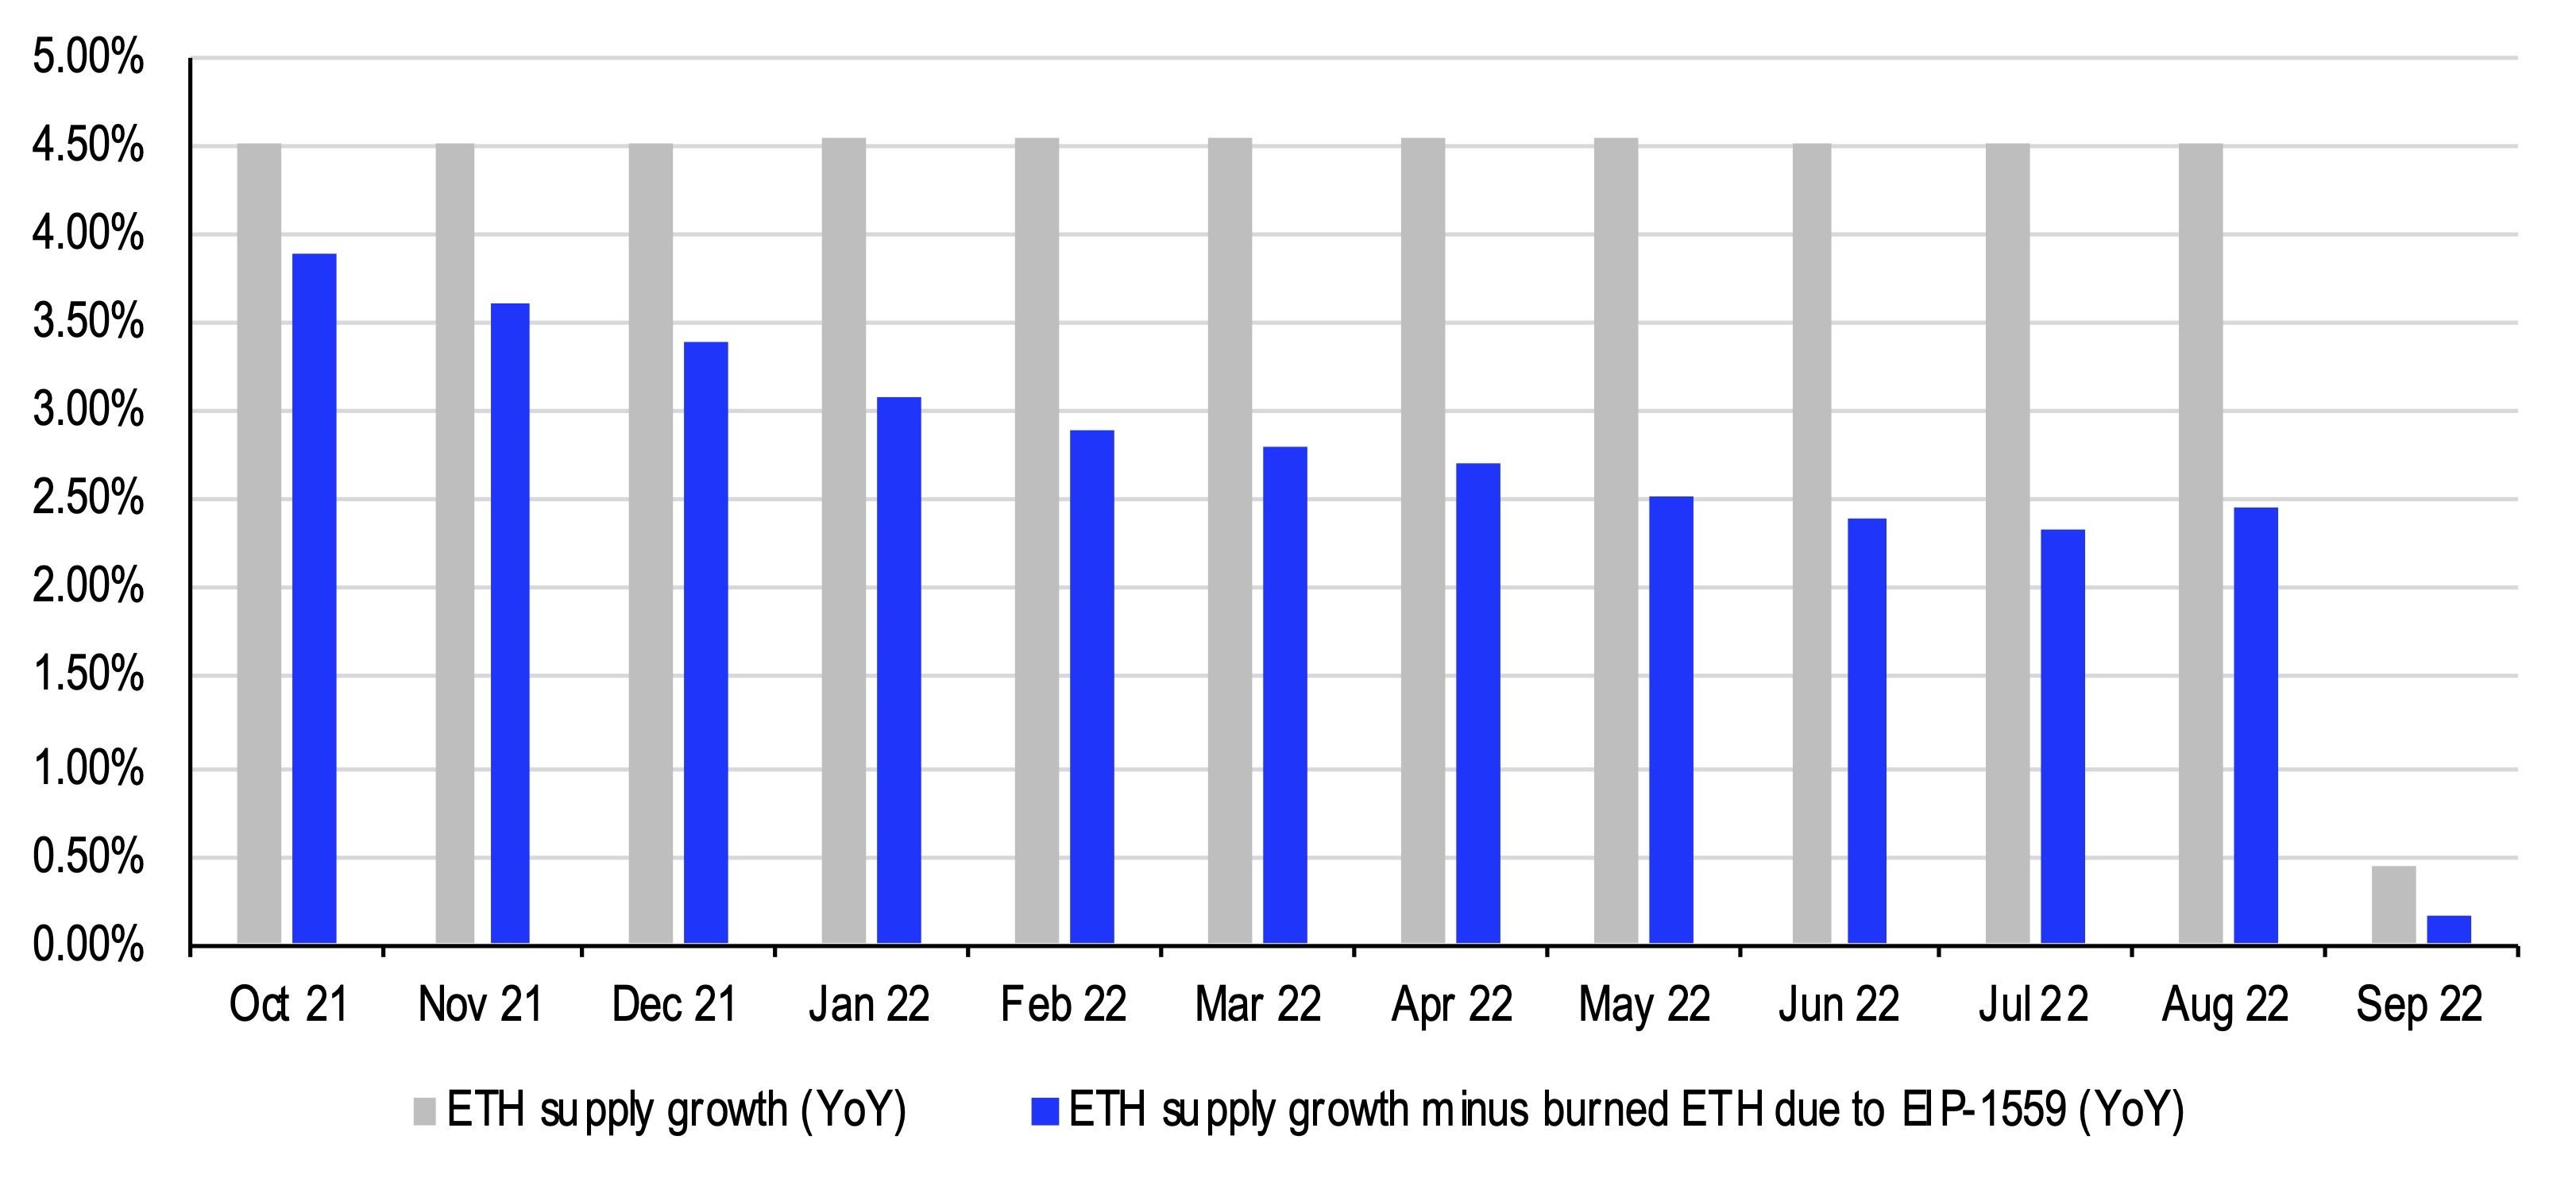 chart showing Annualized ETH supply growth (with and without burned ETH)